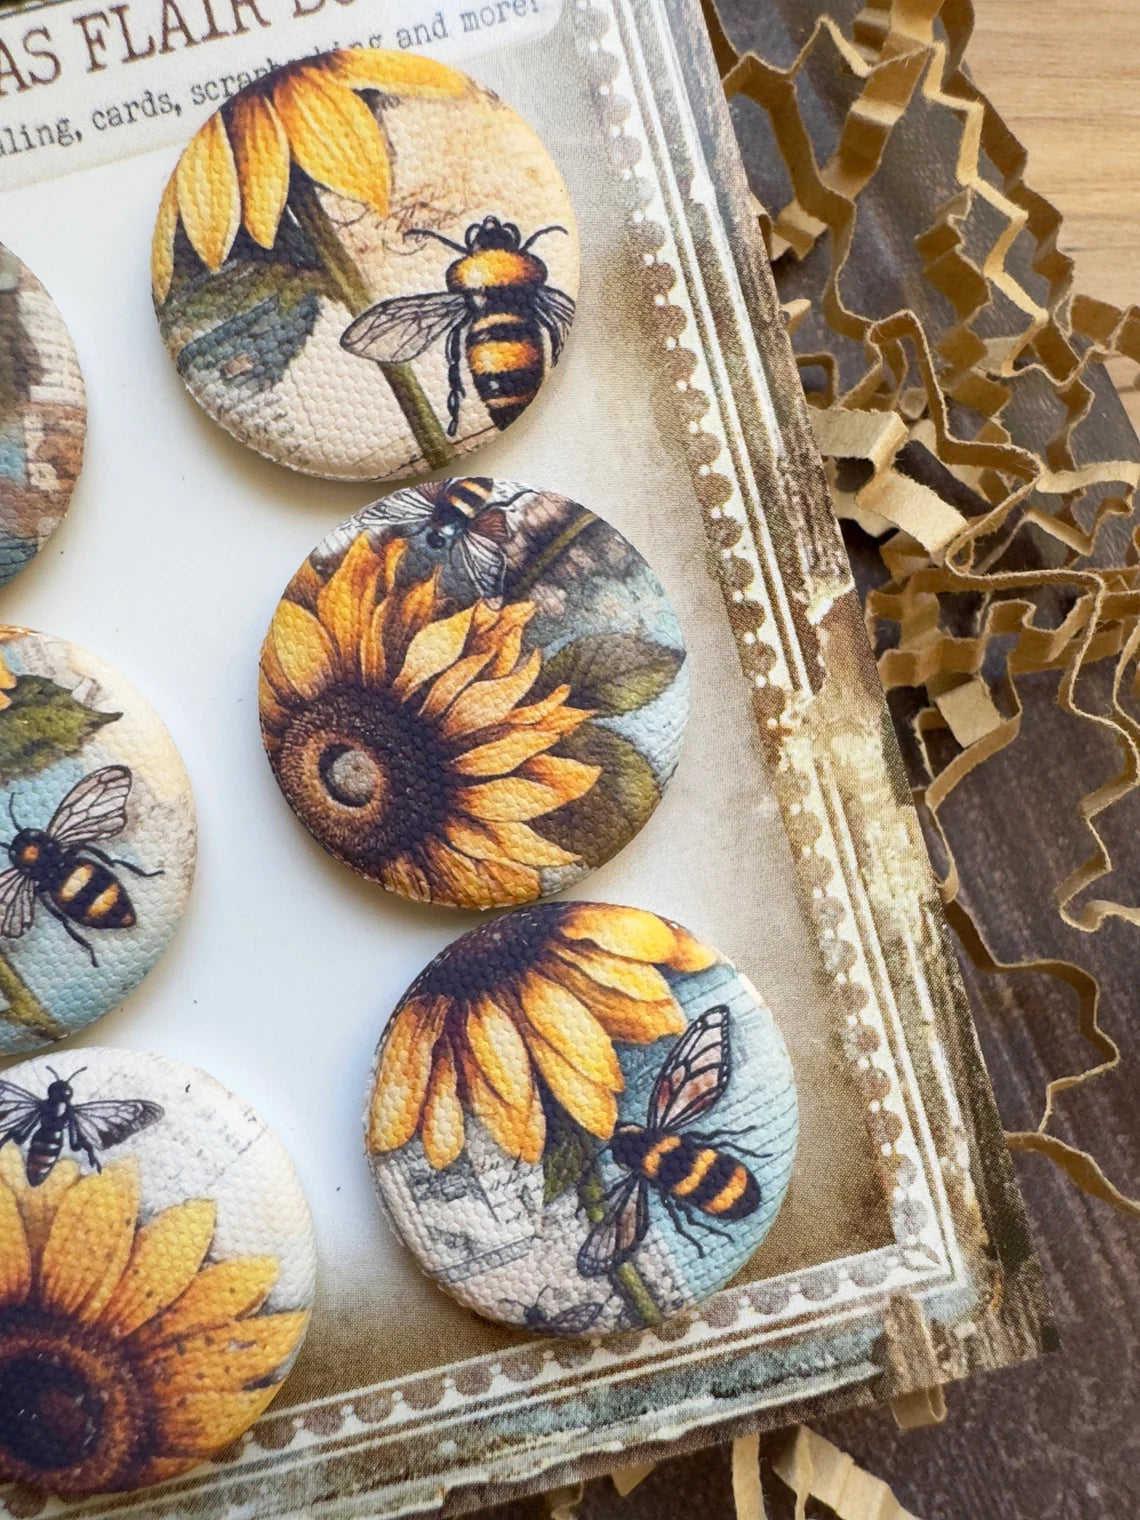 Vintage Sunflower Bee Canvas Flair Buttons